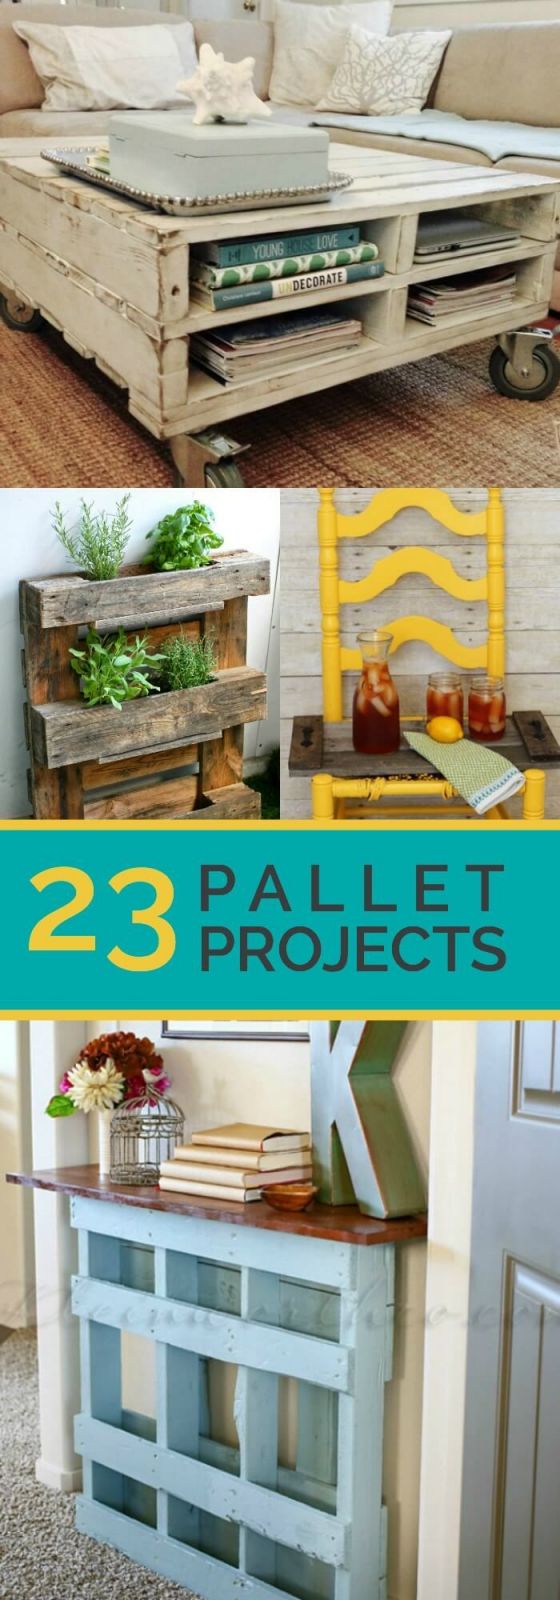 Top Things To Make From Wooden Pallets